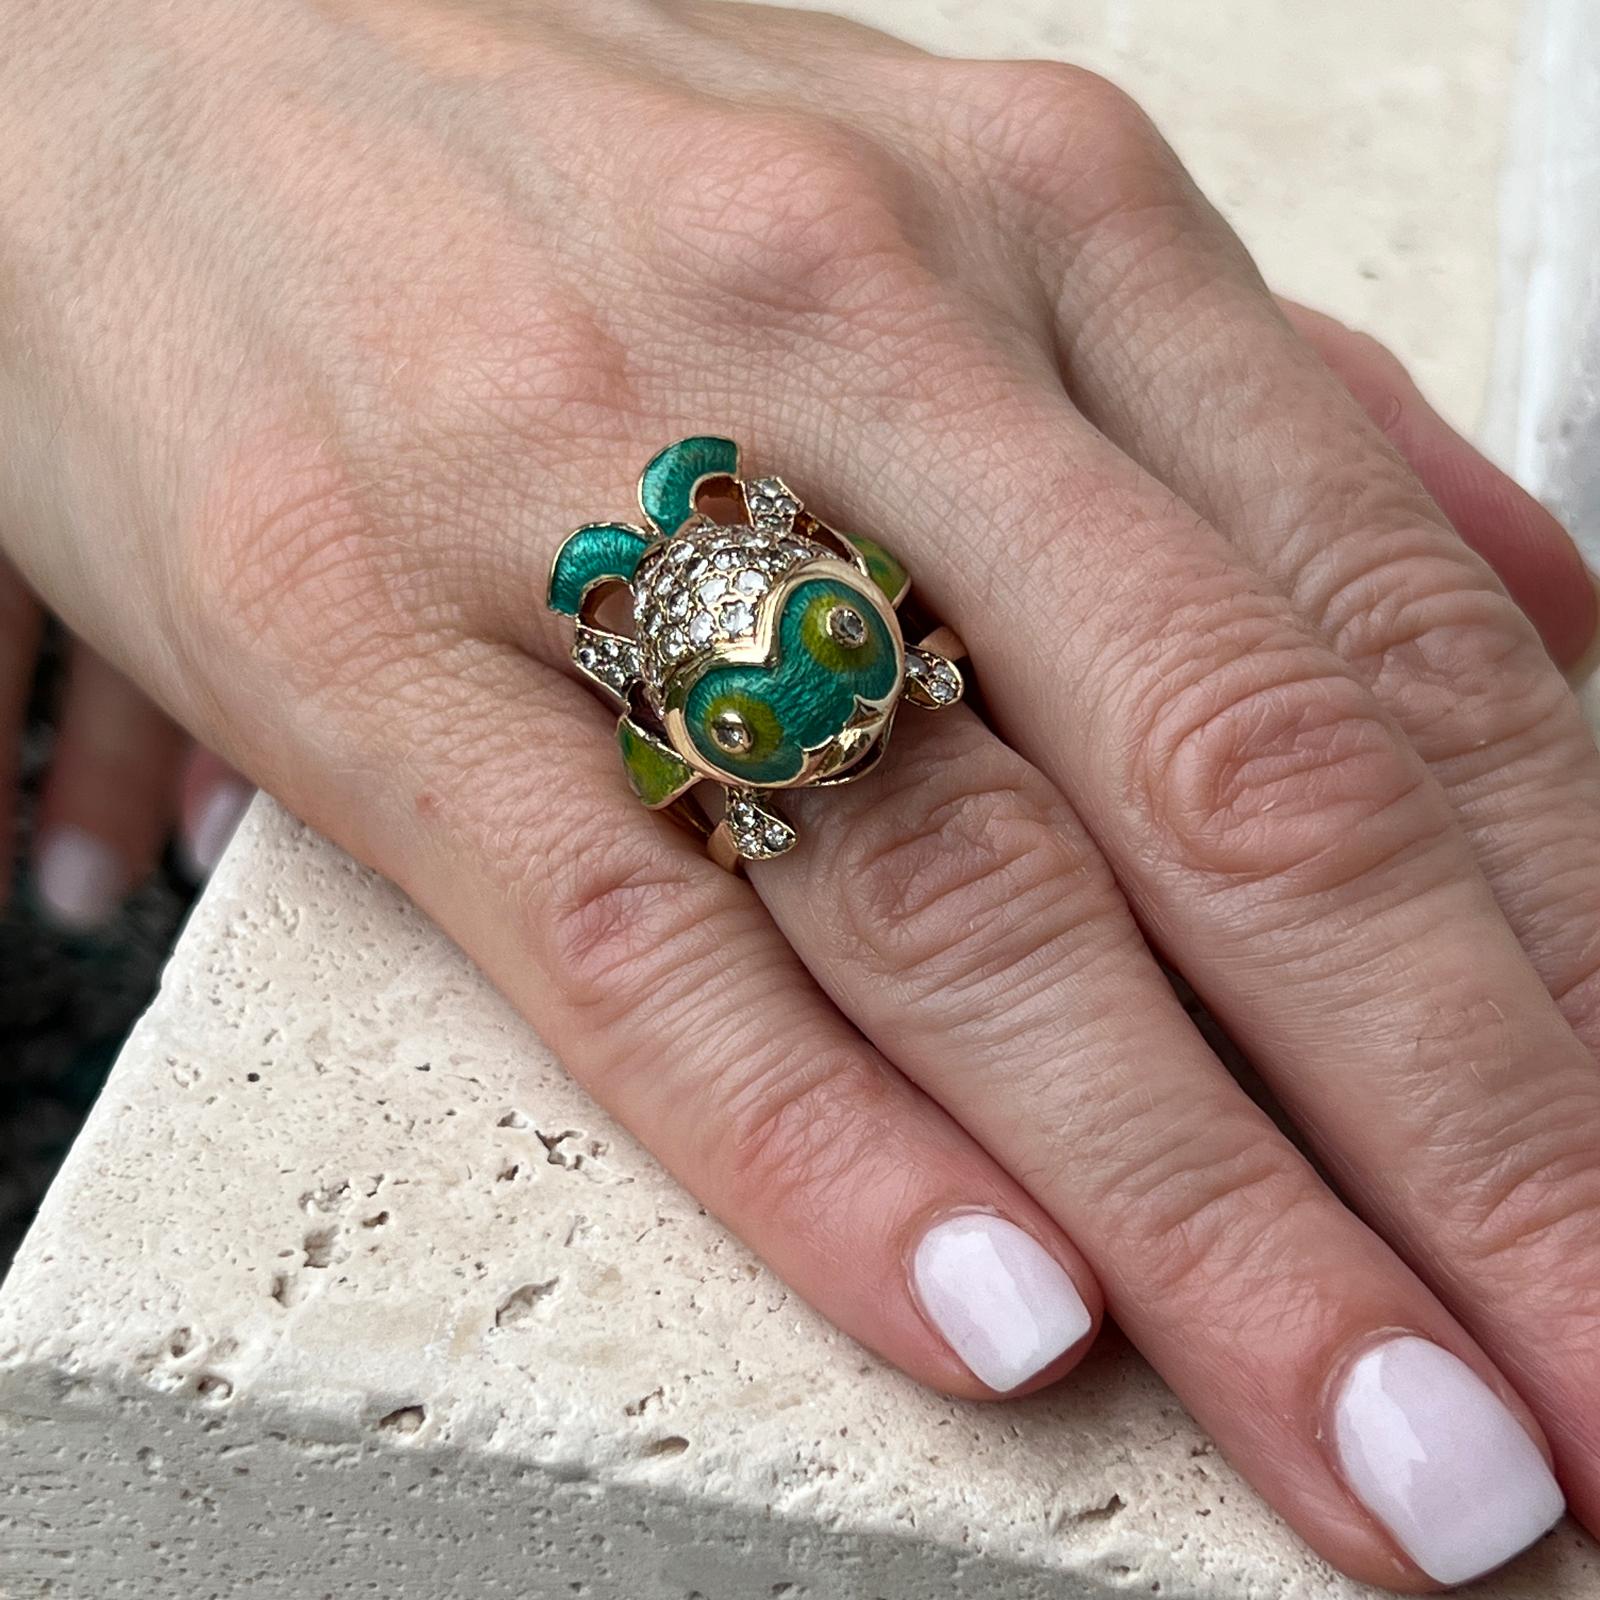 Adorable enamel and diamond fish ring handcrafted in 14 karat yellow gold. The ring features colorful blue and green enamel and round brilliant cut diamonds weighing approximately 1.50 CTW. The diamonds are graded H-I color and SI clarity. The ring